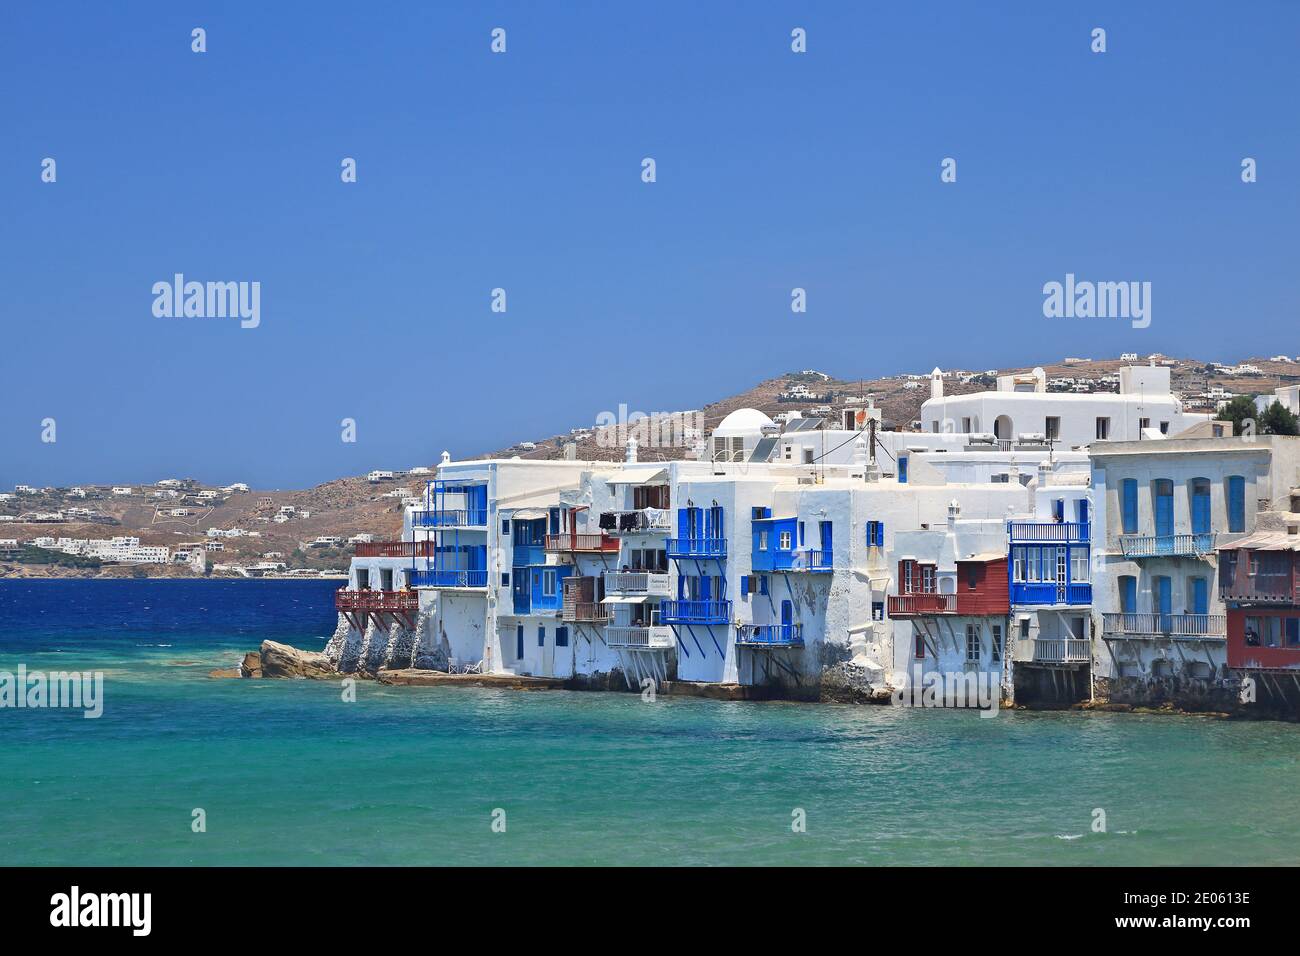 Mykonos island, the district called Little Venice (Mikri Venetia) made of old houses right by the sea, in Cyclades islands, Greece, Europe. Stock Photo